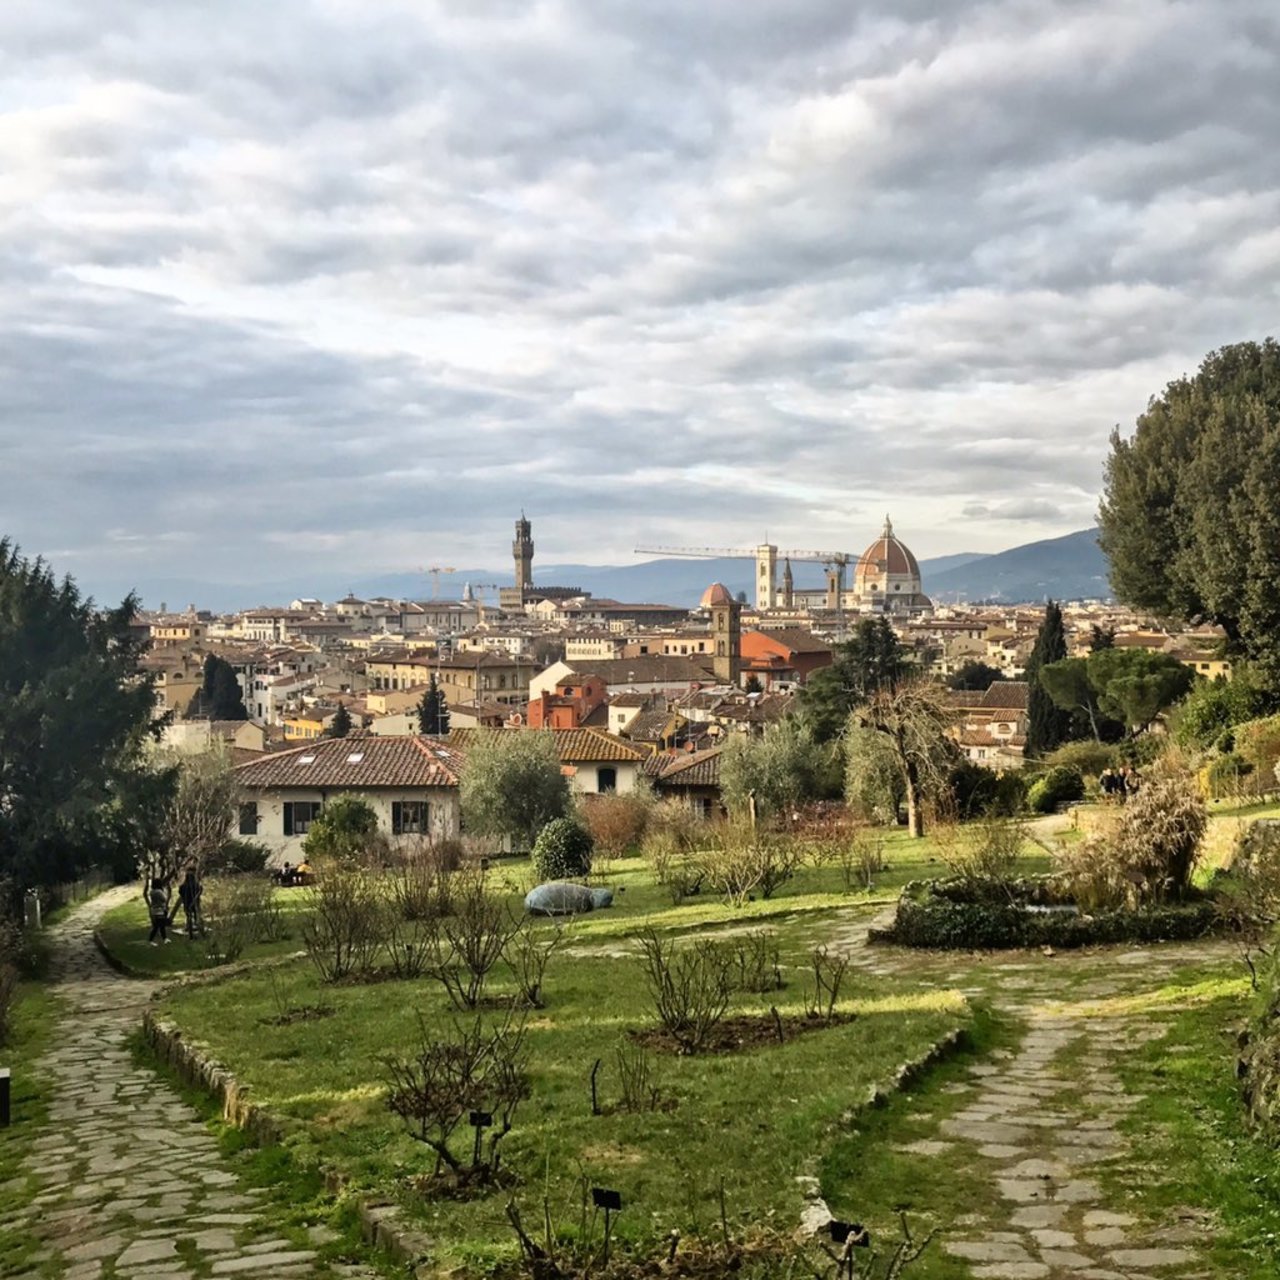 #VisitTuscany: RT melindagallo: Such a joy to be surrounded by nature to enjoy a view of #Florence today #Firenze … https://t.co/jFIc4ubjm9